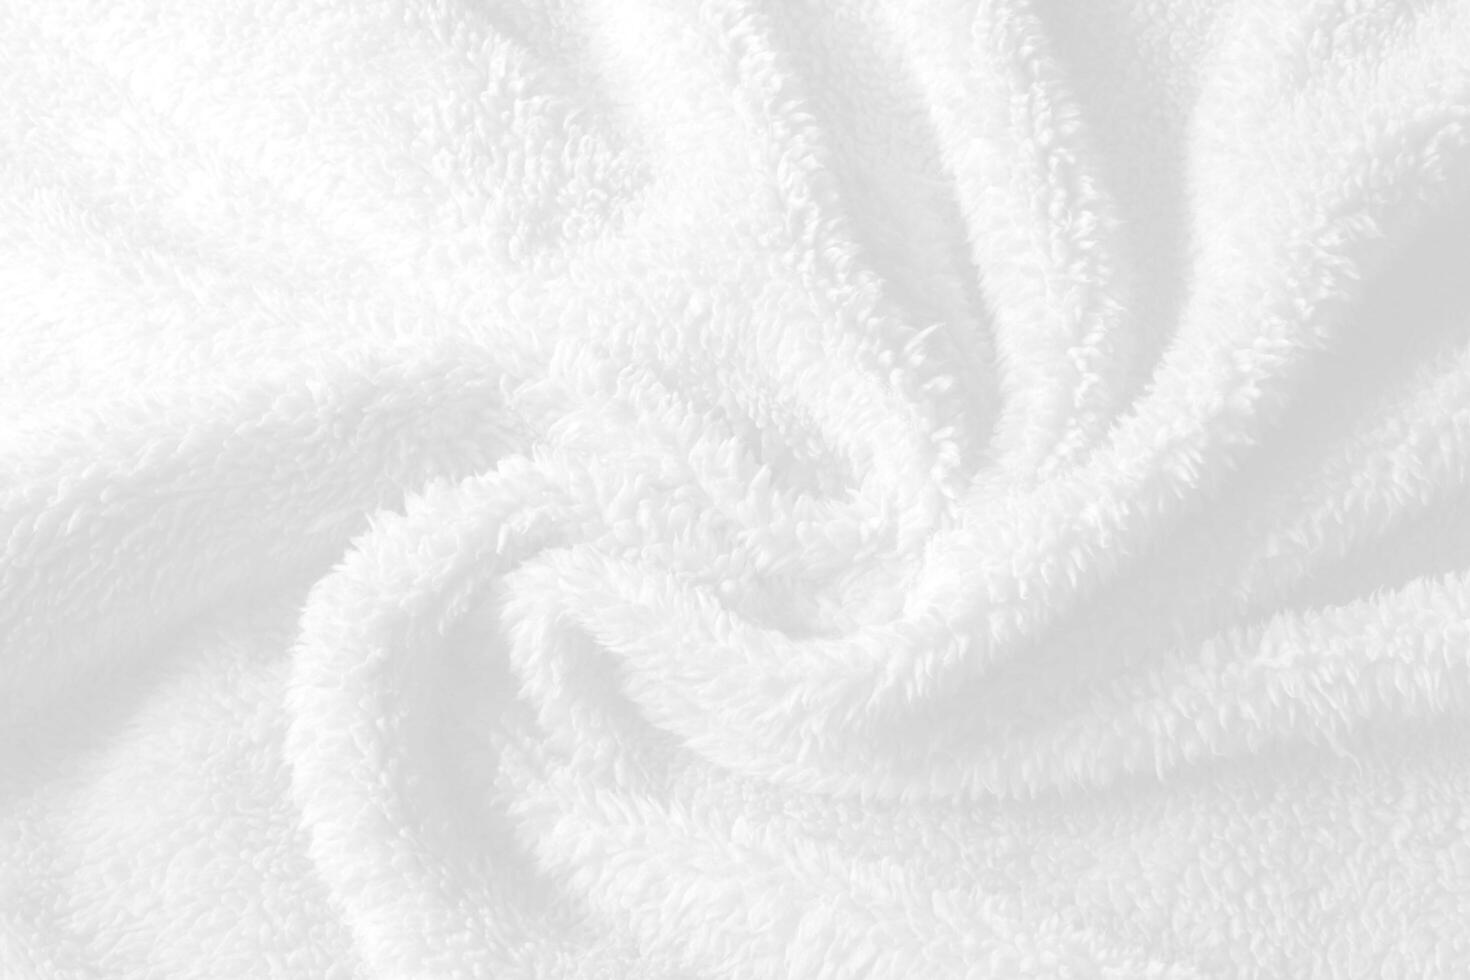 Defocused of abstract white towel background with waves. photo